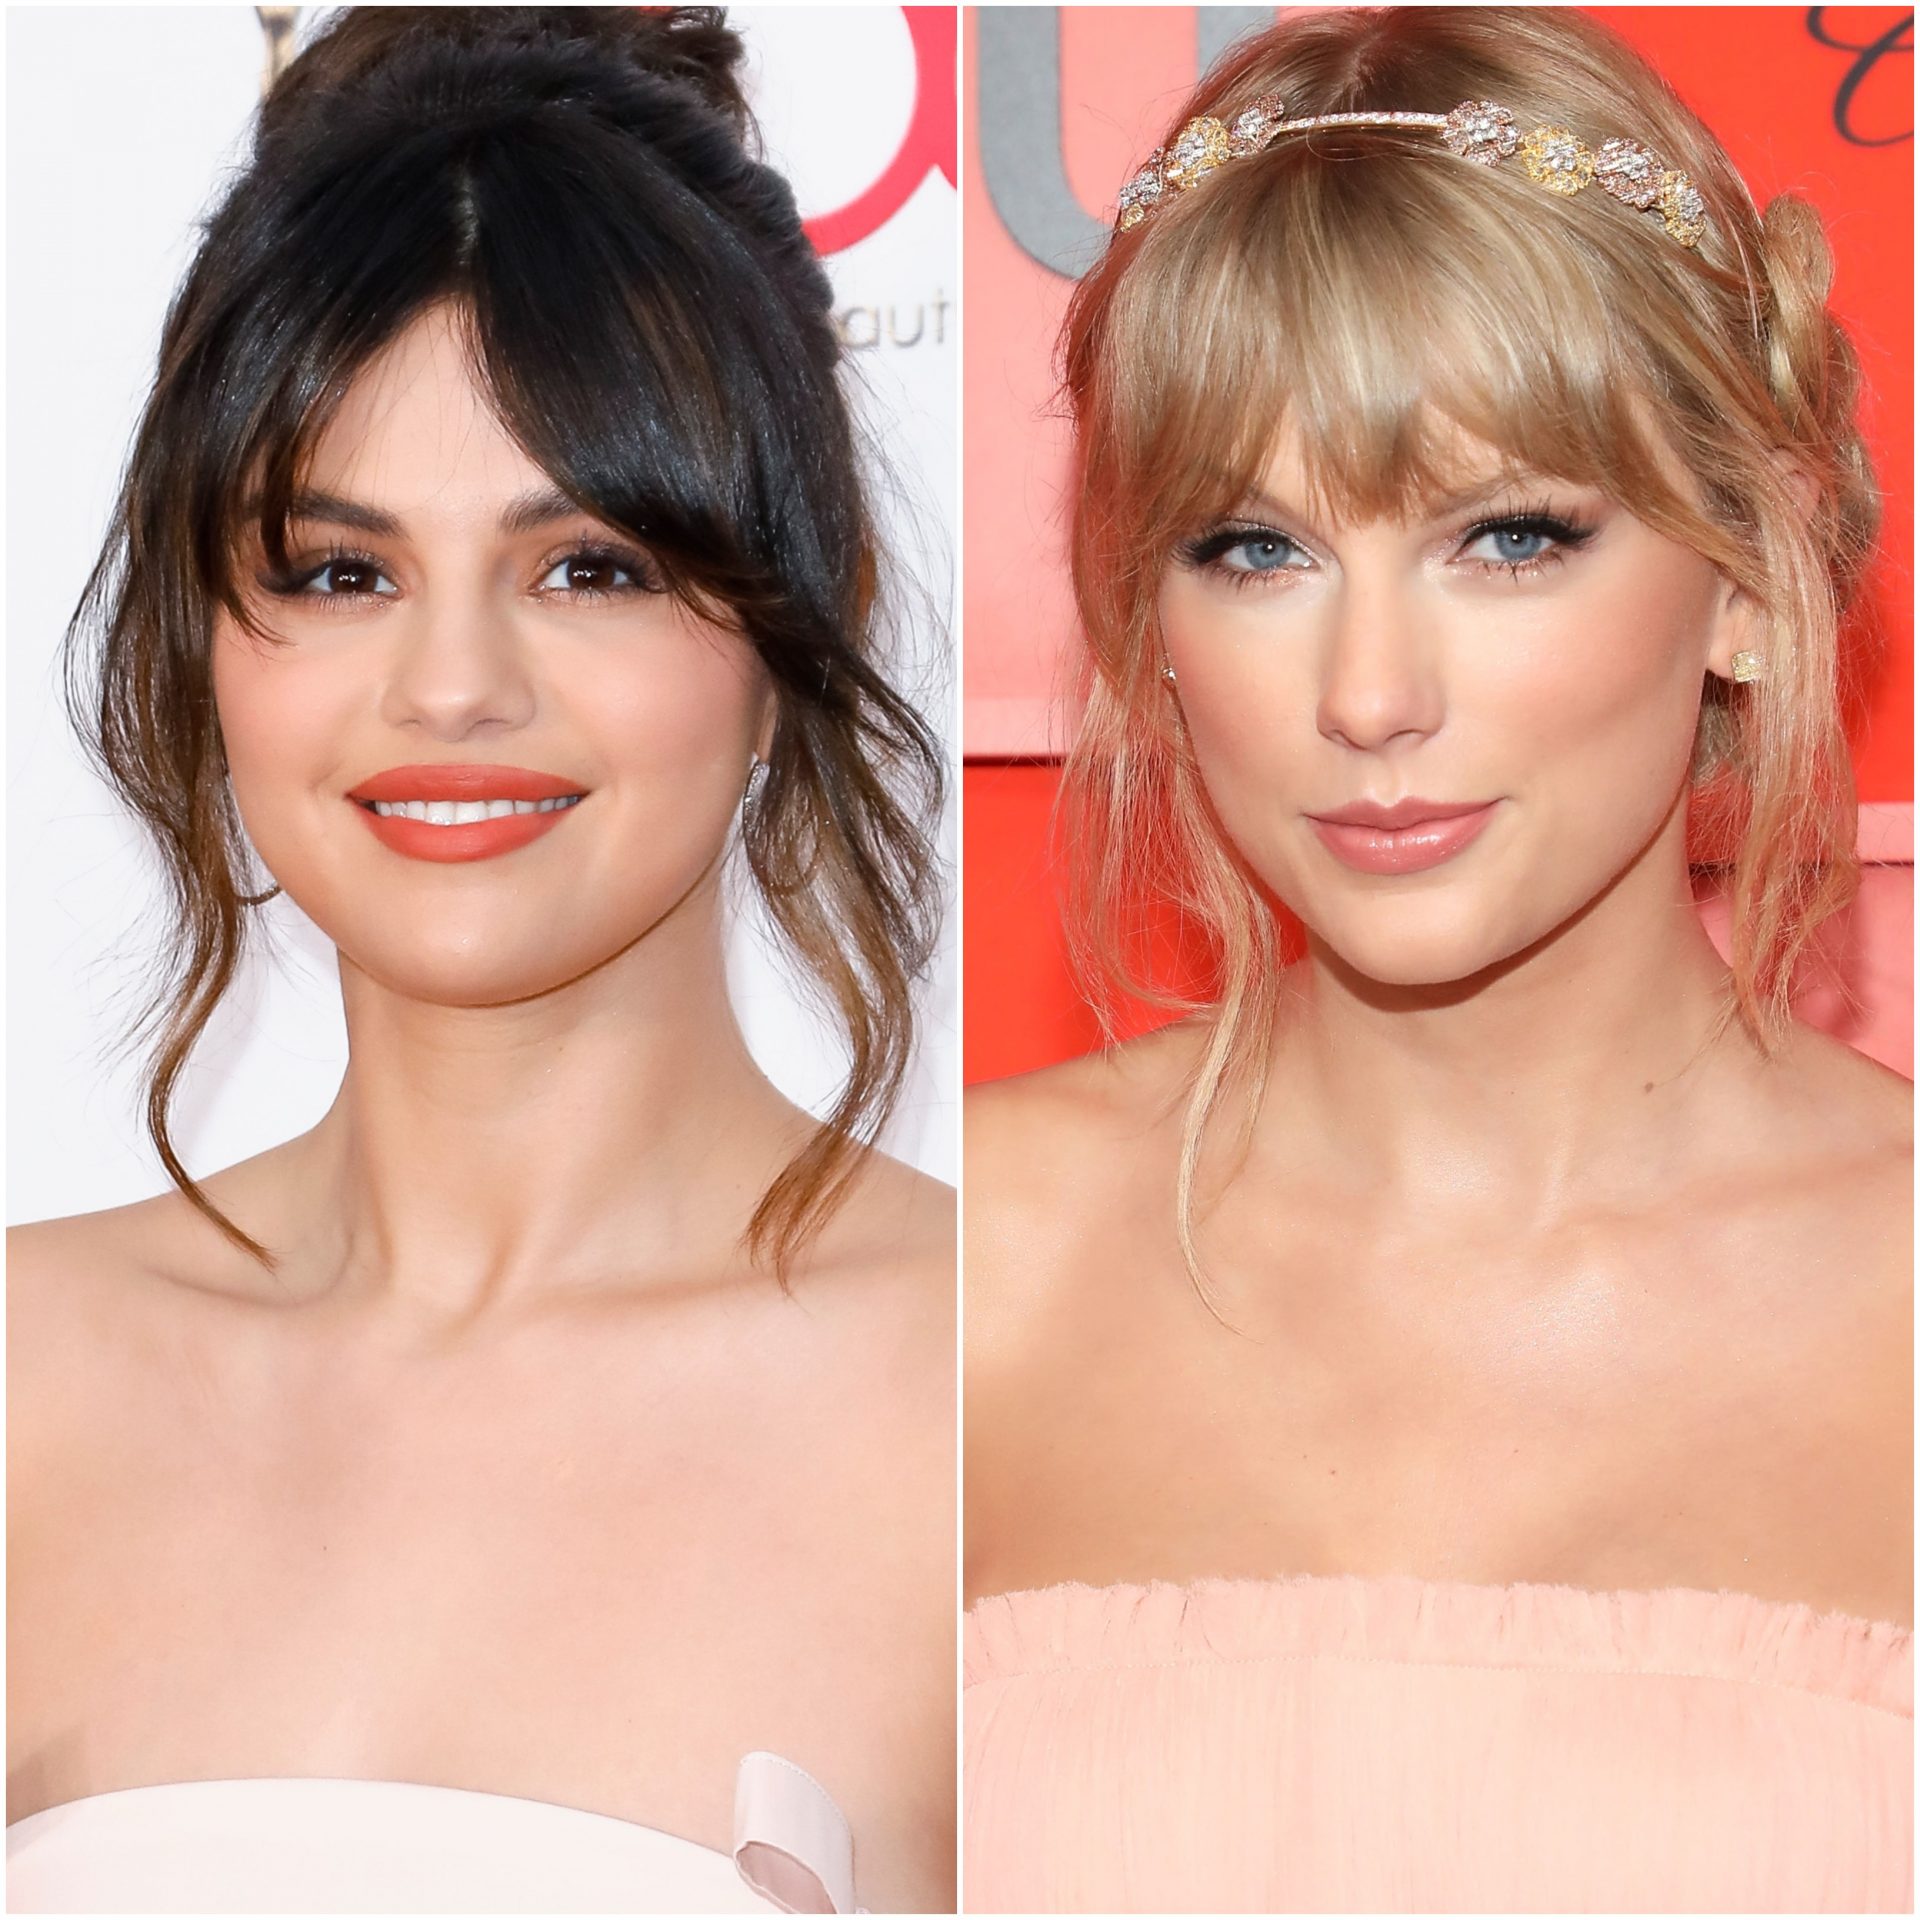 Selena Gomez and Taylor Swift Dangle Talked About Recording Music Together